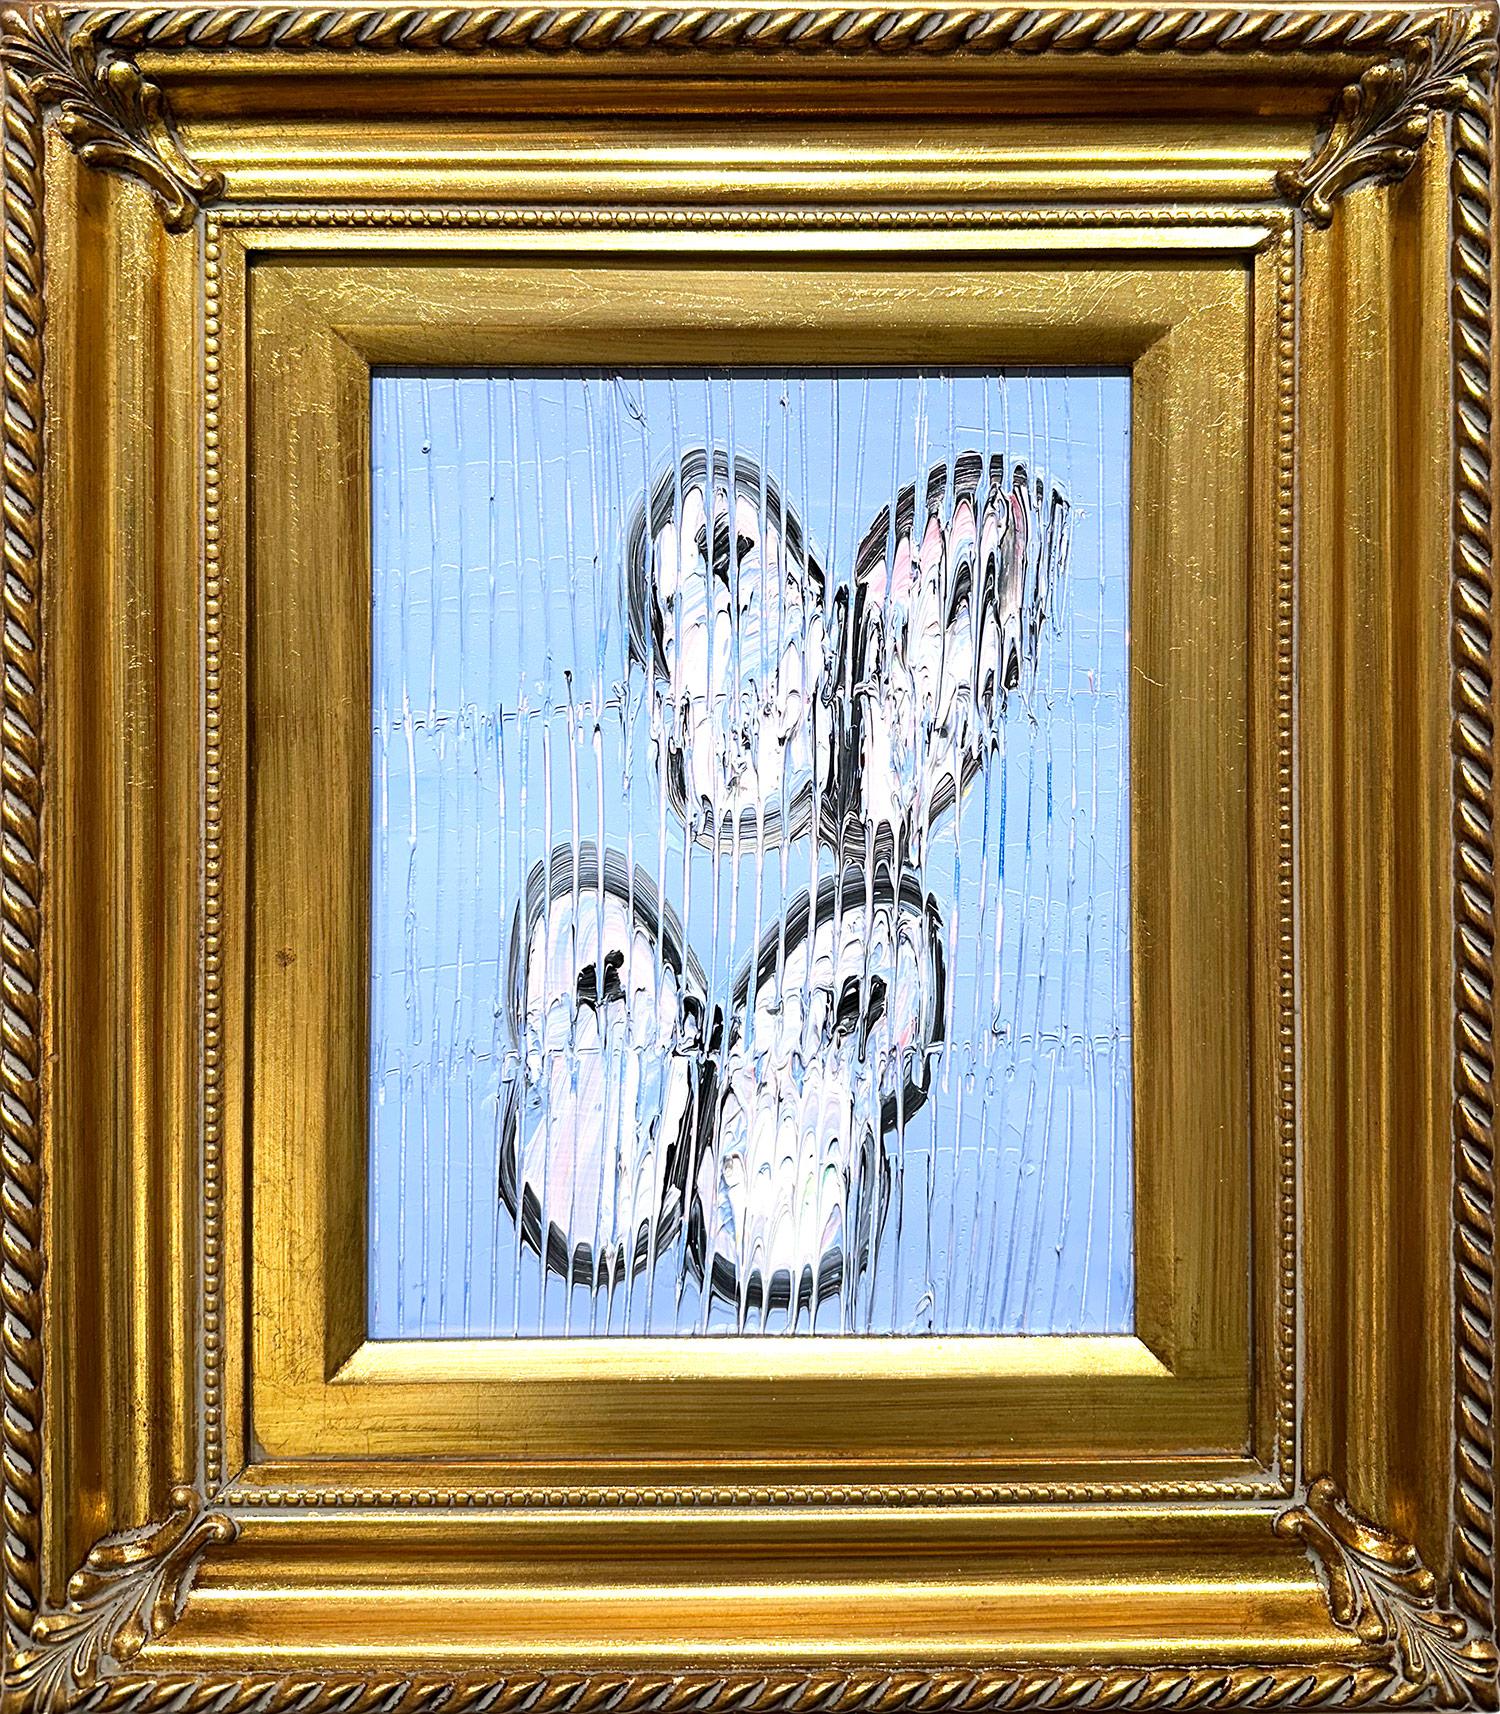 Hunt Slonem Animal Painting - "Air Fare" White Butterflies on Periwinkle Blue Background with Scoring Framed